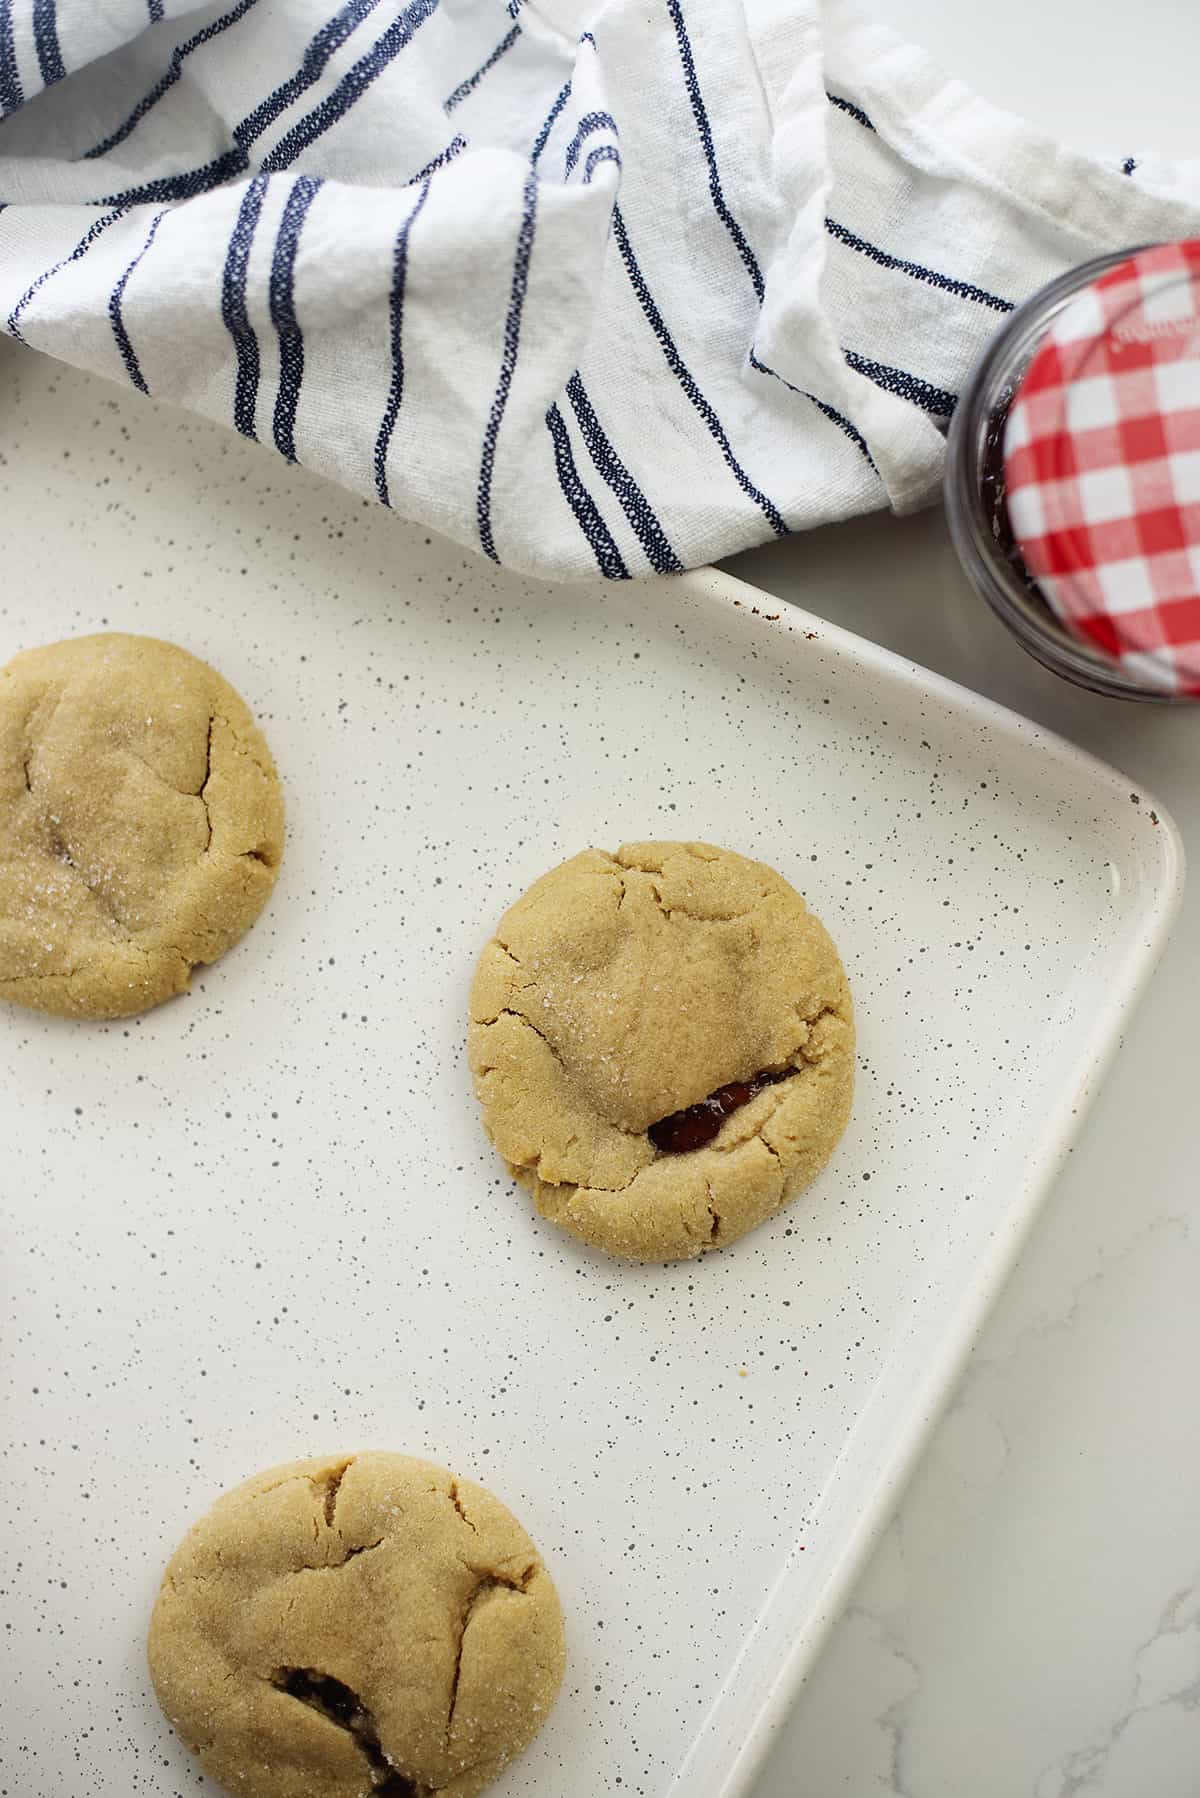 Overhead view of peanut butter and jelly stuffed cookies.